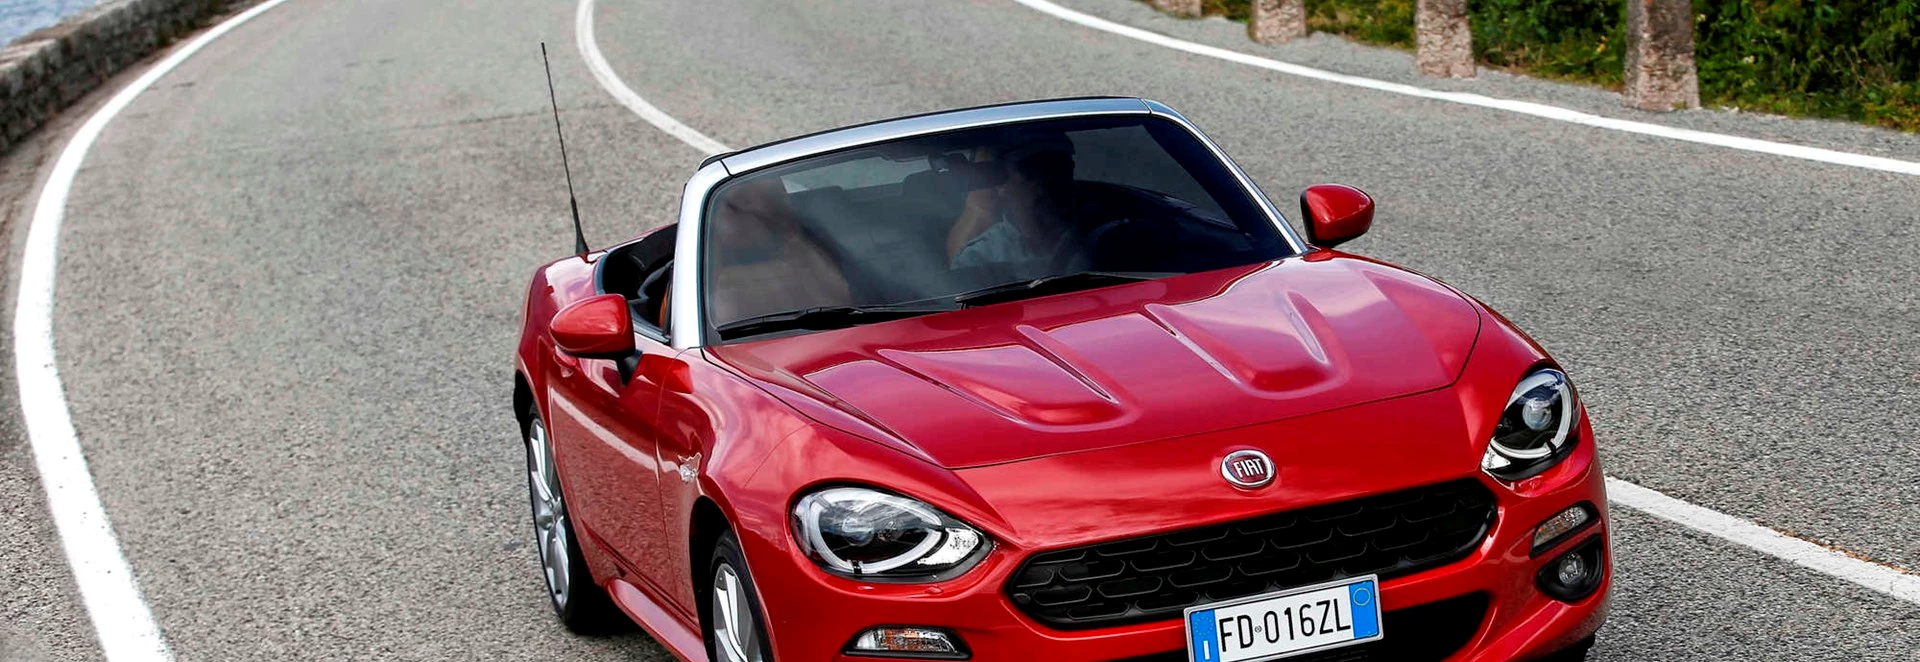 Fiat 124 Spider 1.4-litre Turbo Multiair Lusso review 